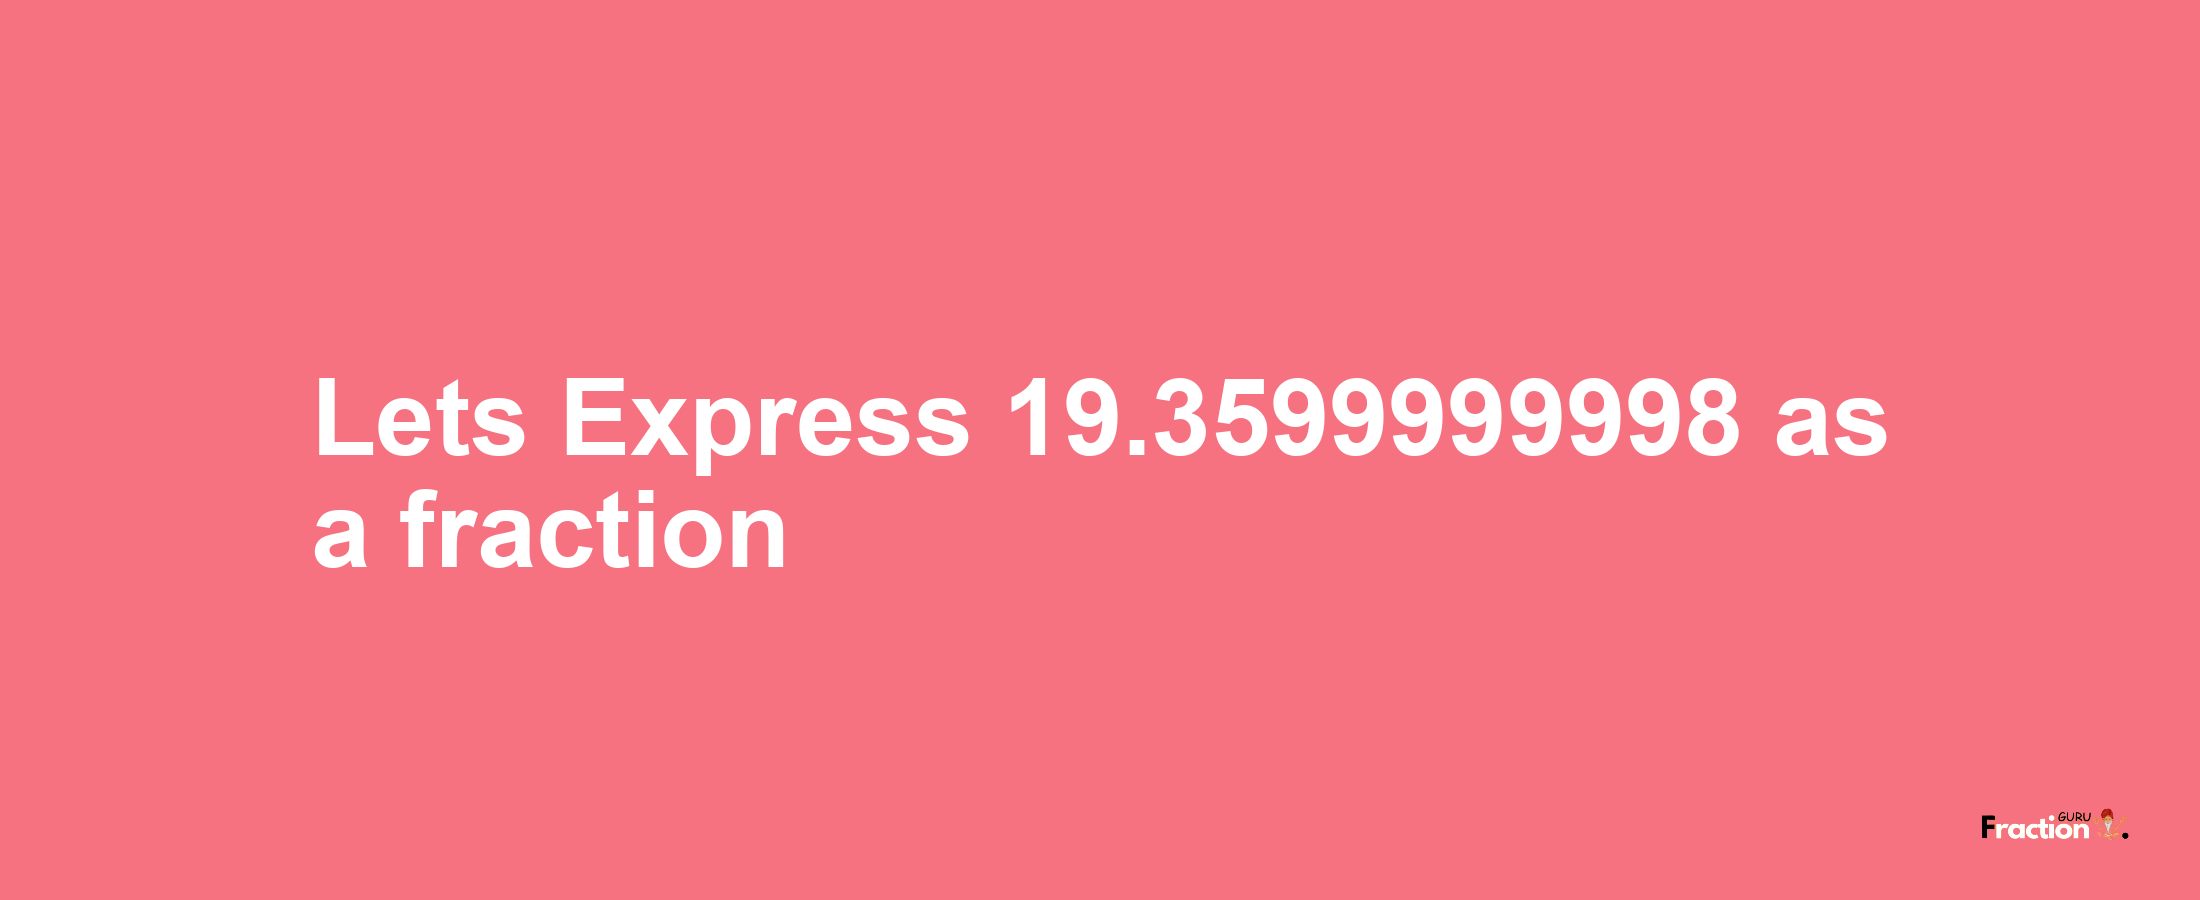 Lets Express 19.3599999998 as afraction